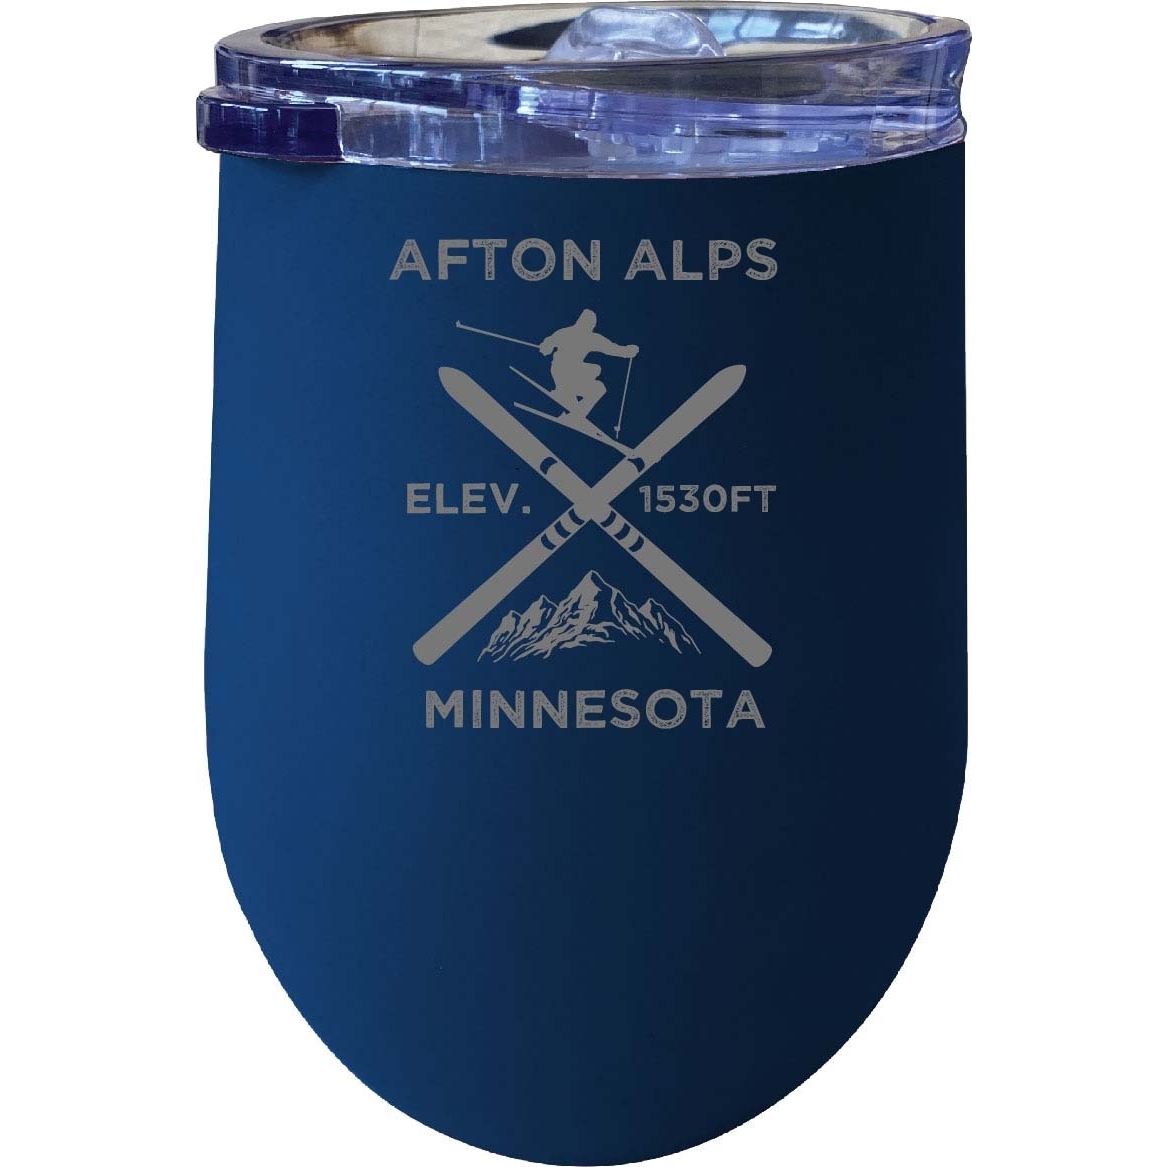 Afton Alps Minnesota Ski Souvenir 12 Oz Laser Etched Insulated Wine Stainless Steel Tumbler - Rose Gold